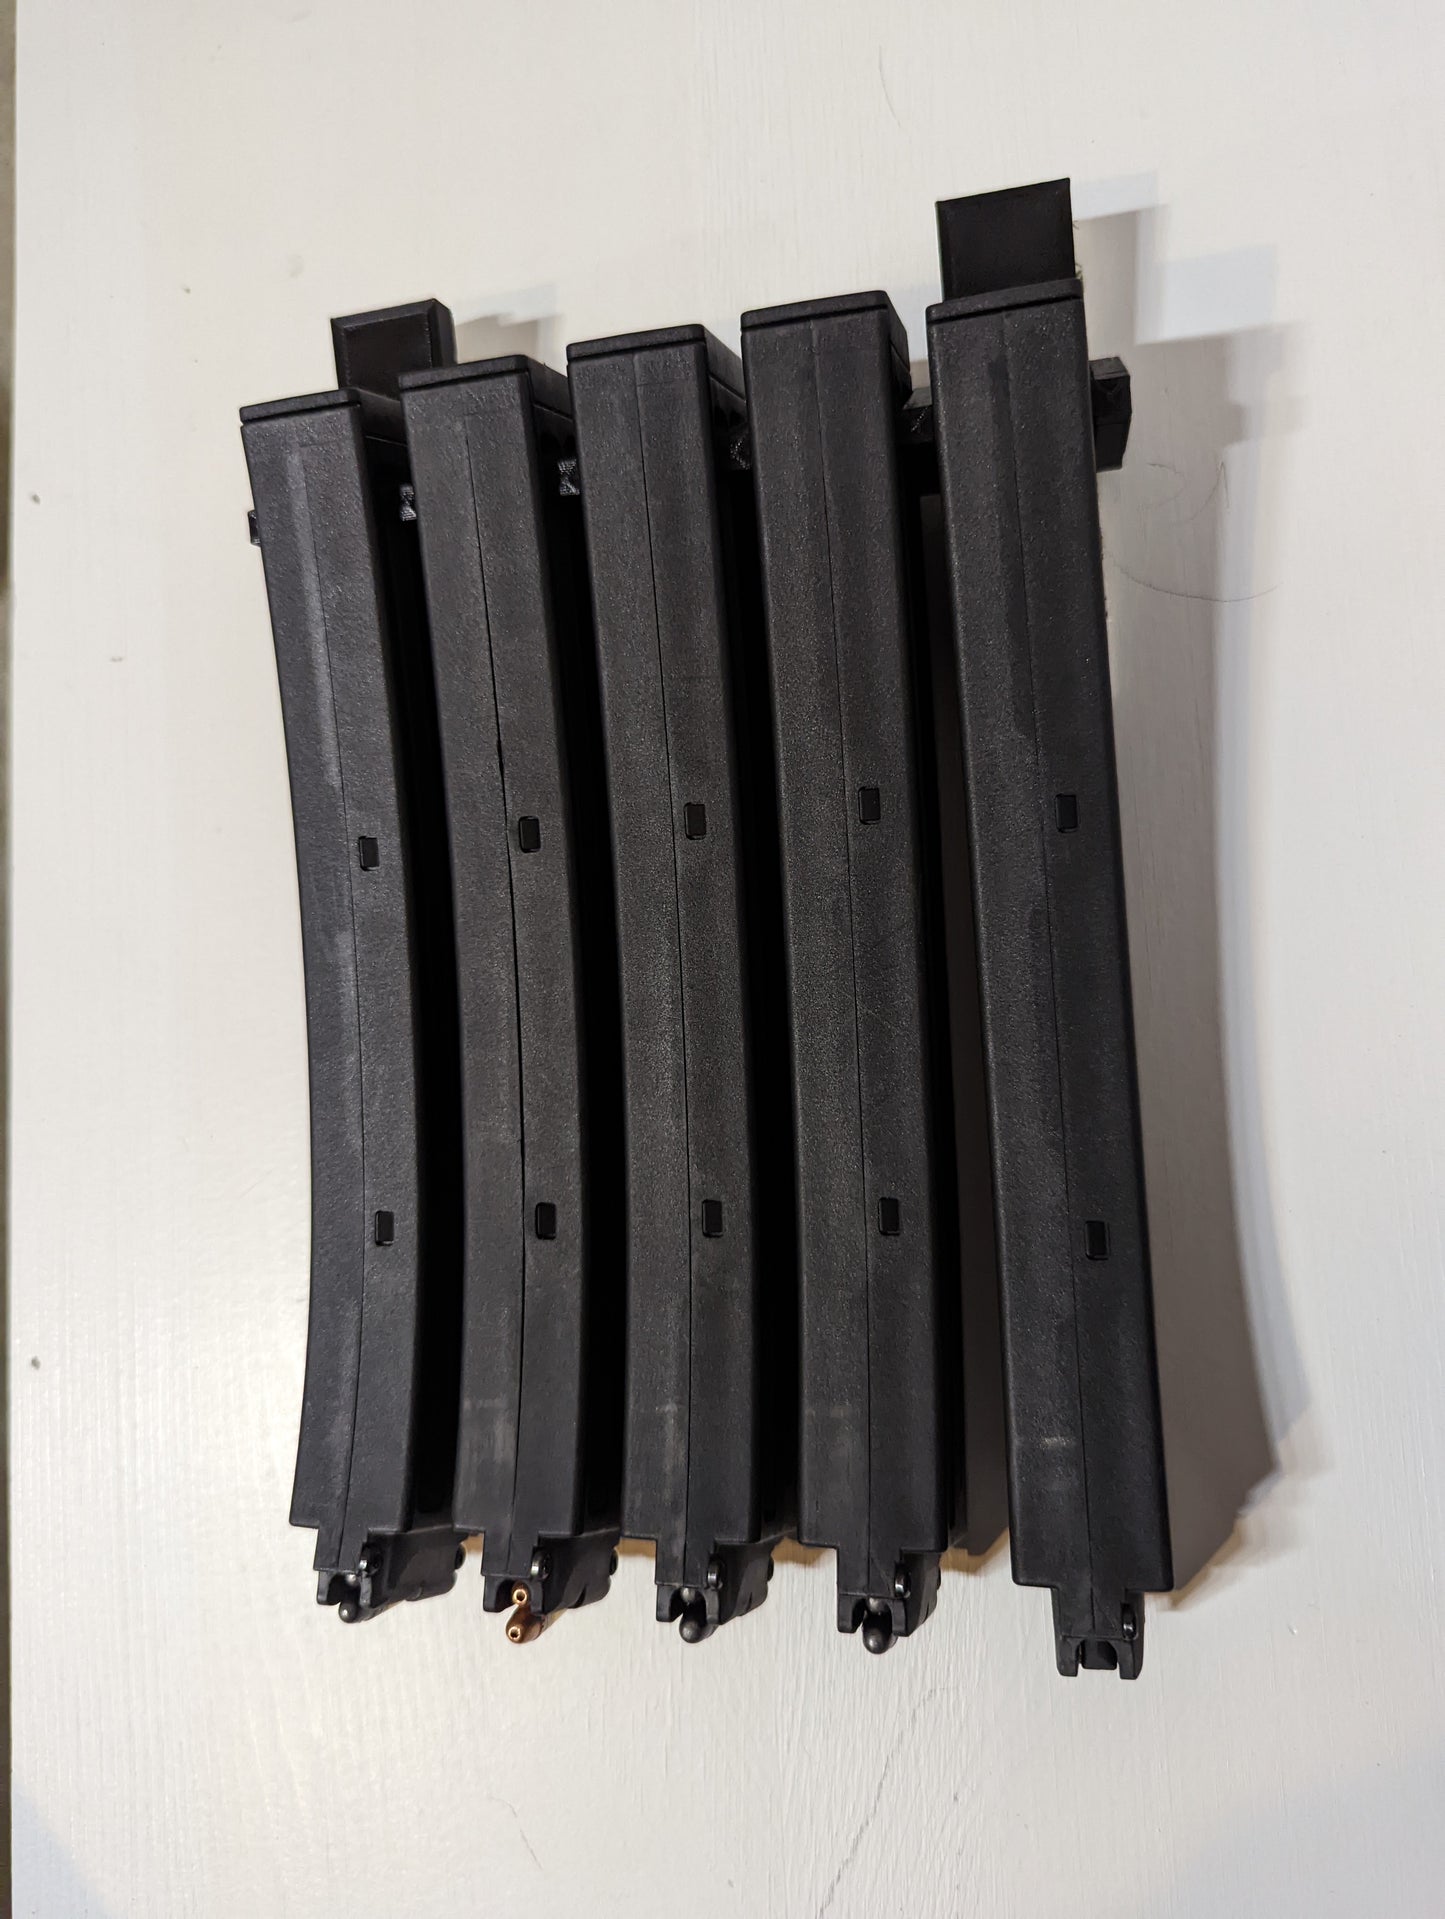 Mount for HK MP5 22 Mags - Command Strips | Magazine Holder Storage Rack